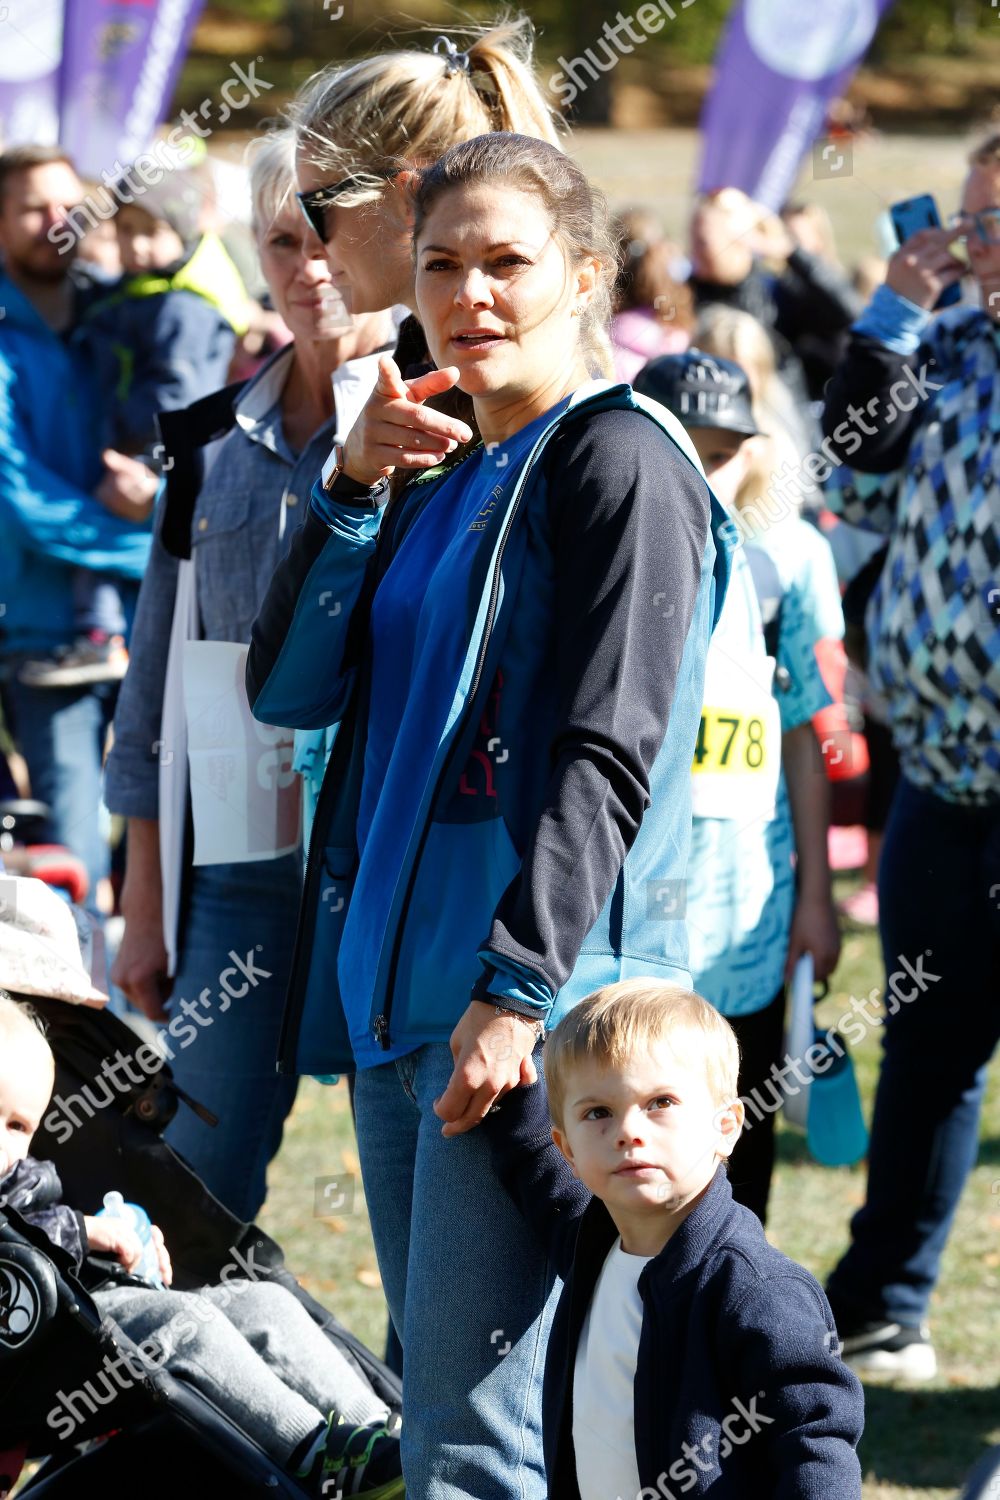 race-and-pep-day-stockholm-sweden-shutterstock-editorial-9884111c.jpg